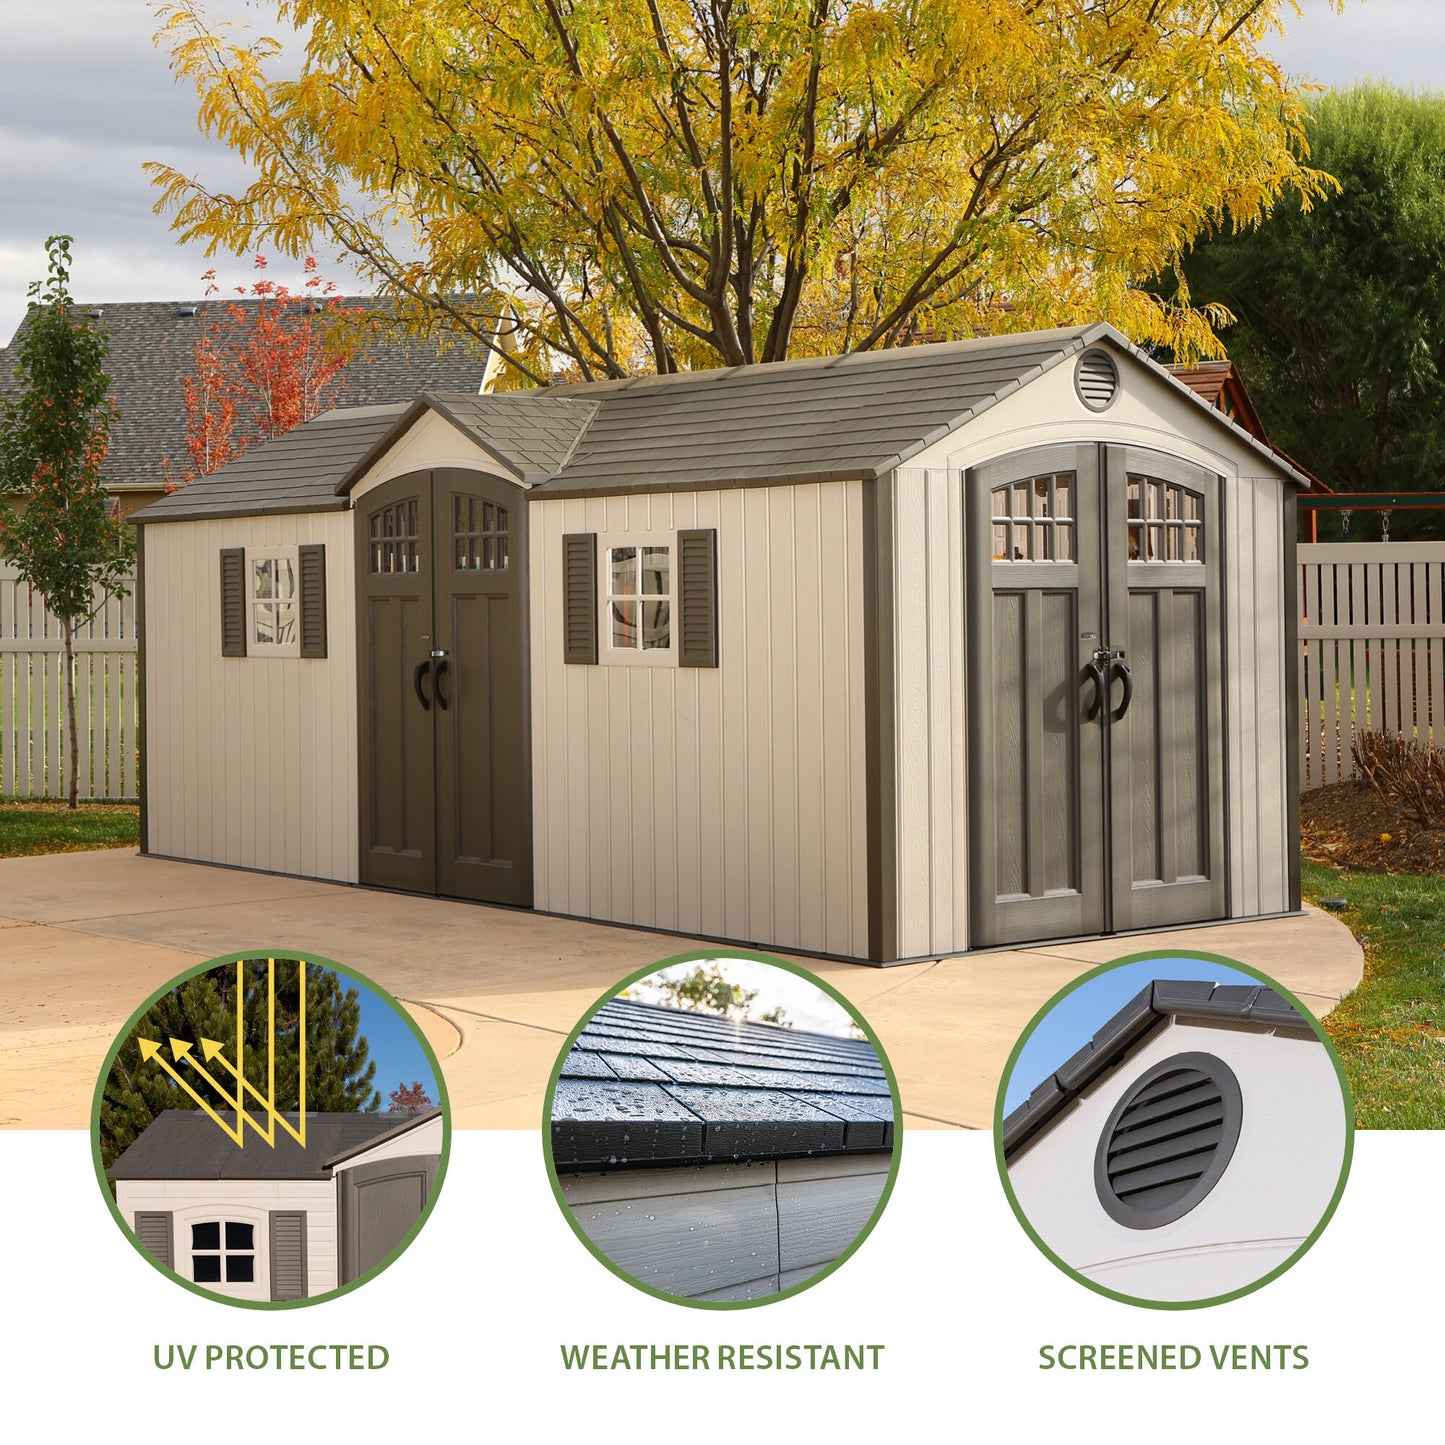 Lifetime 20 Ft. x 8 Ft. Outdoor Storage Shed DUAL ENTRY(60127)